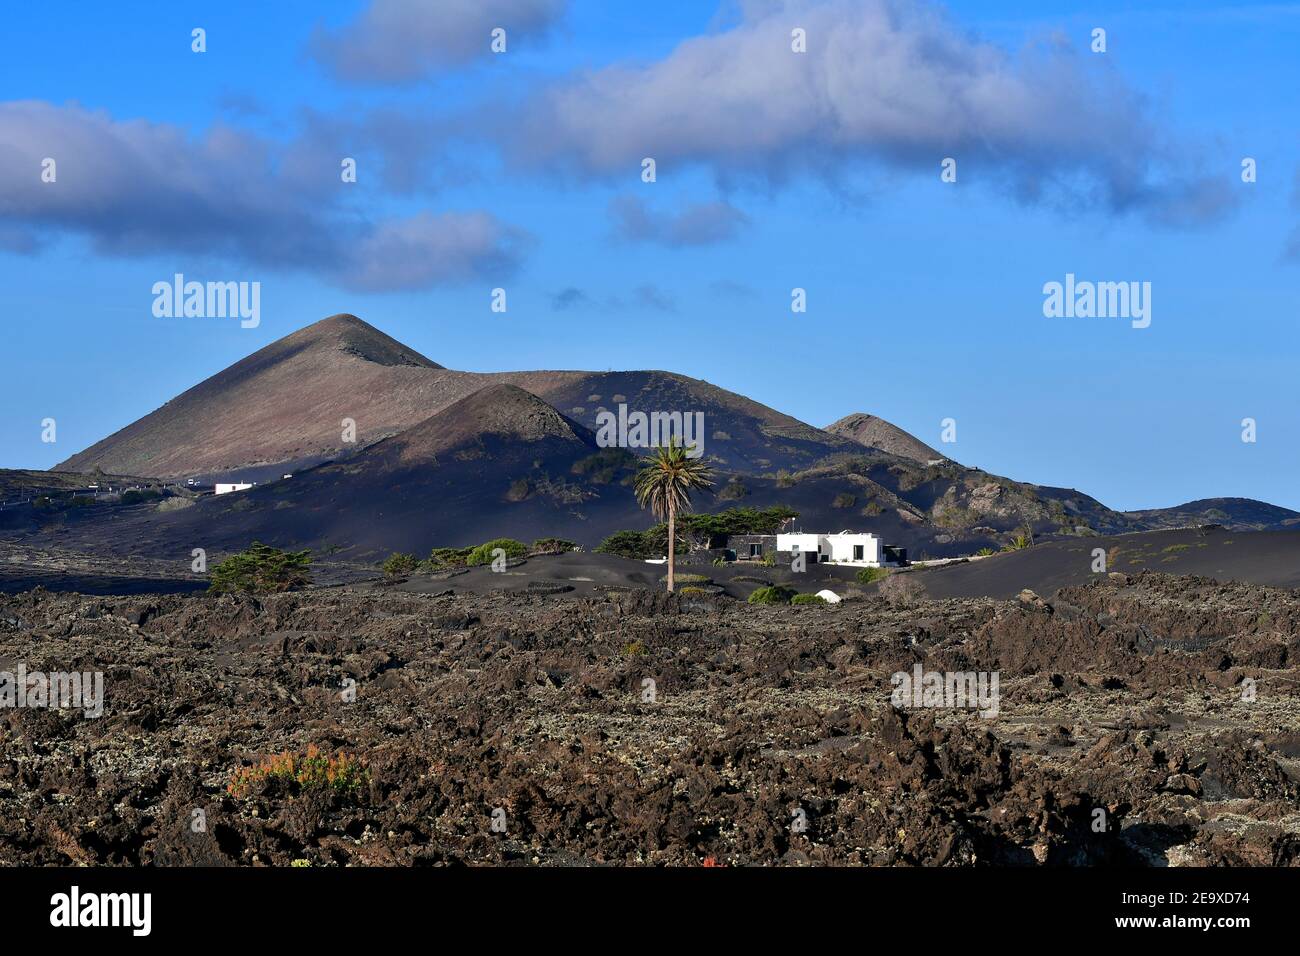 Beautiful volcanic landscape with a white house and a palm tree in front. Lanzarote, Canary Islands, Spain. Image taken from public ground. Stock Photo